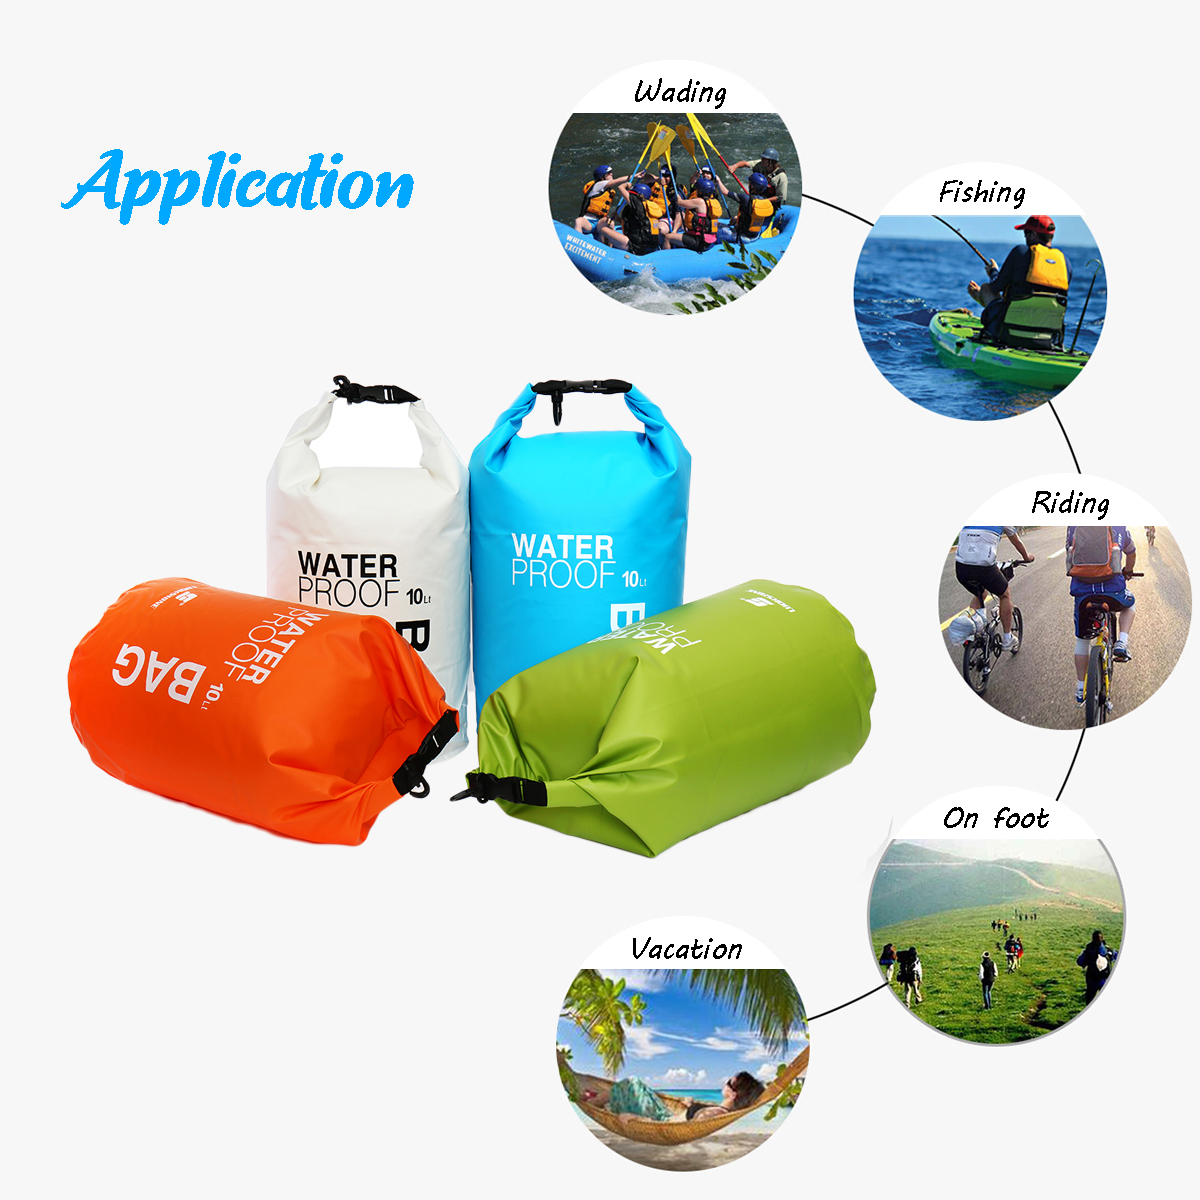 10L-Outdoor-Swimming-Air-Inflation-Floating-Mobile-Phone-Camera-Storage-PVC-Waterproof-Bag-1820807-14